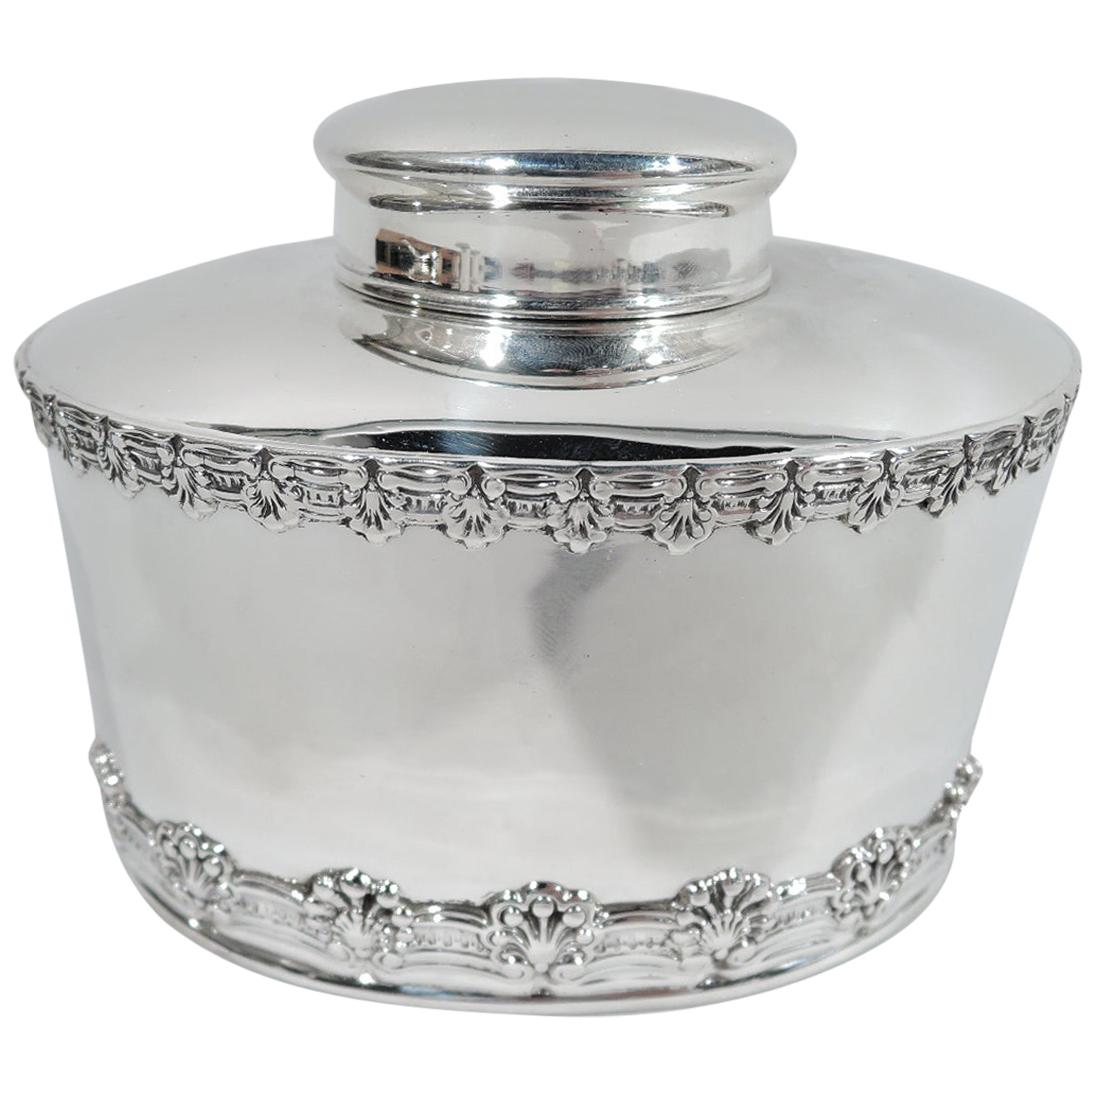 Antique Tiffany & Co. Sterling Silver Tea Caddy in English King Pattern